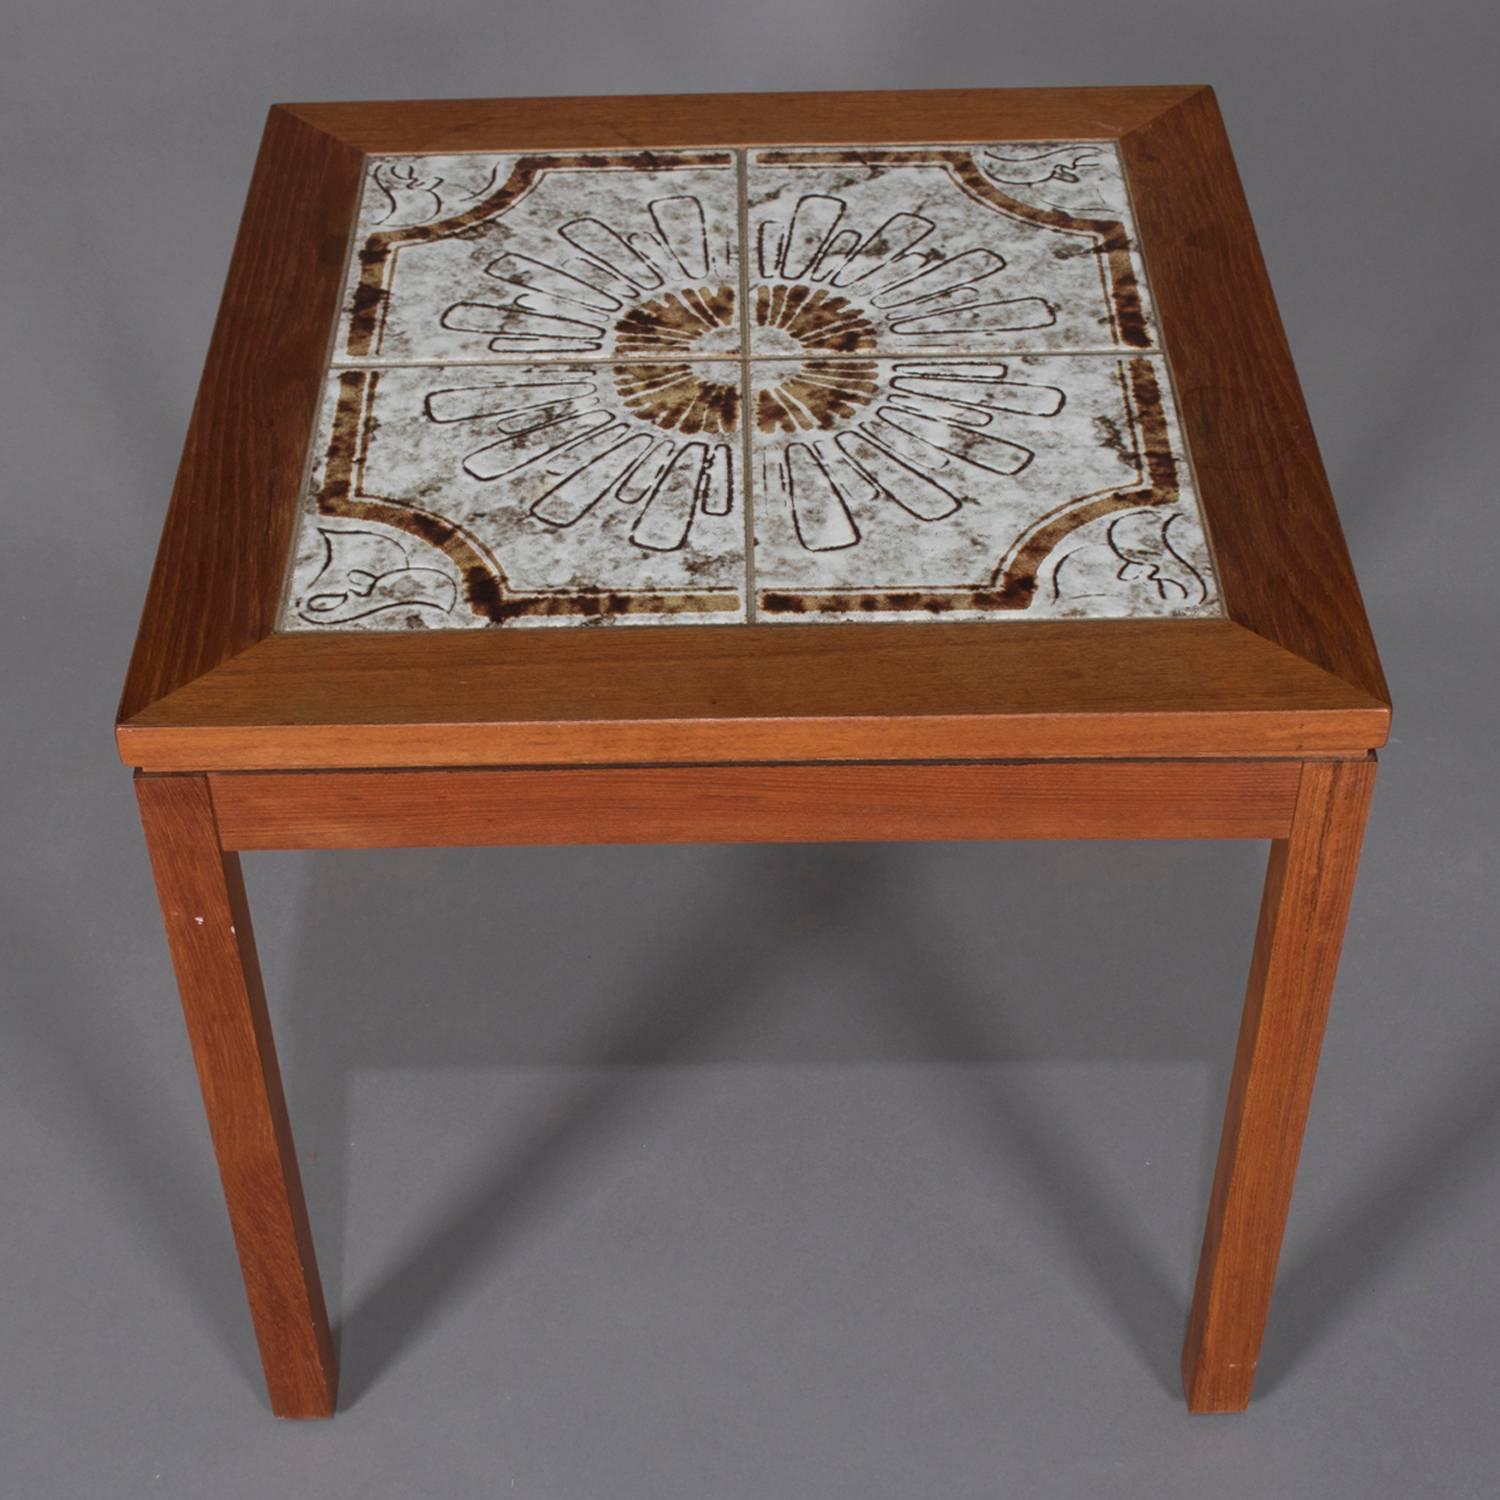 Midcentury Danish modern Nils Thorsson school tile top side table features walnut frame with California tile top in stylized sunburst pattern, circa 1960.

Measures: 20